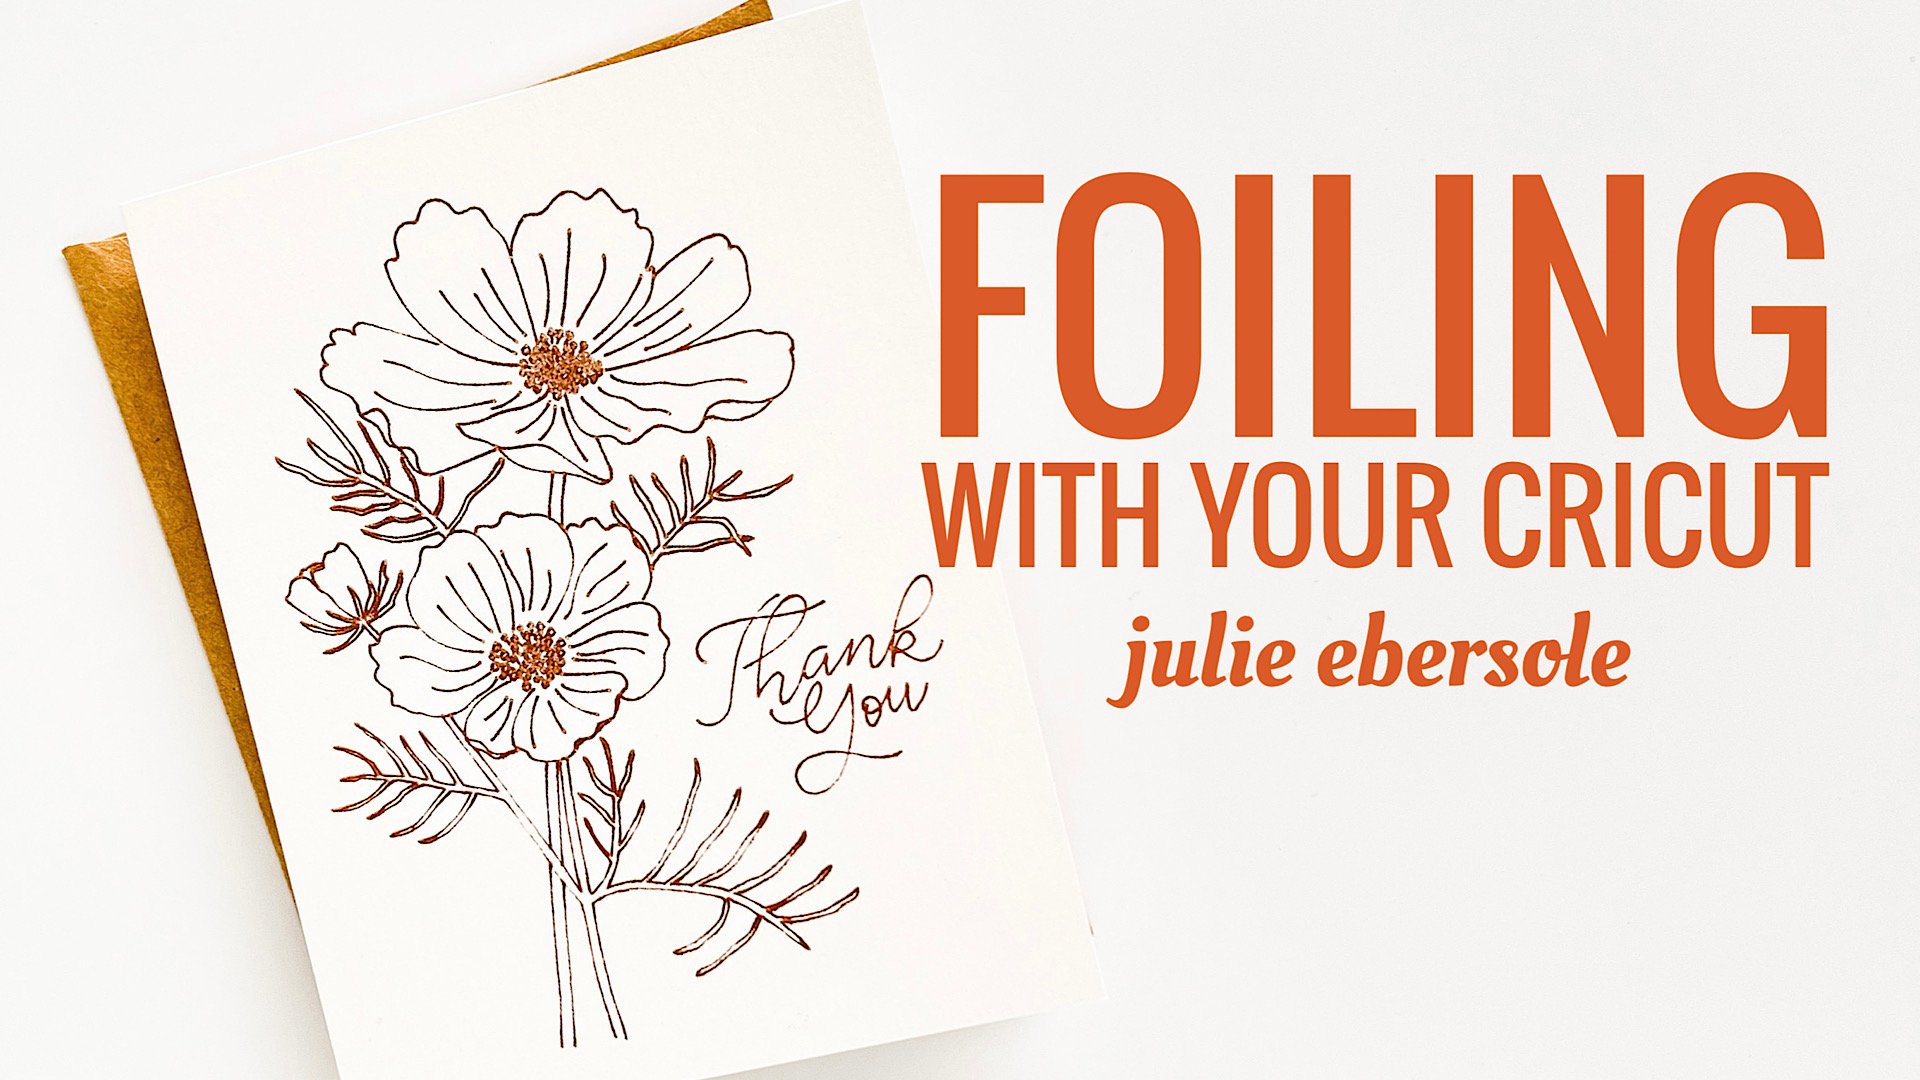 IS A CRICUT RIGHT FOR YOU? — JULIE EBERSOLE